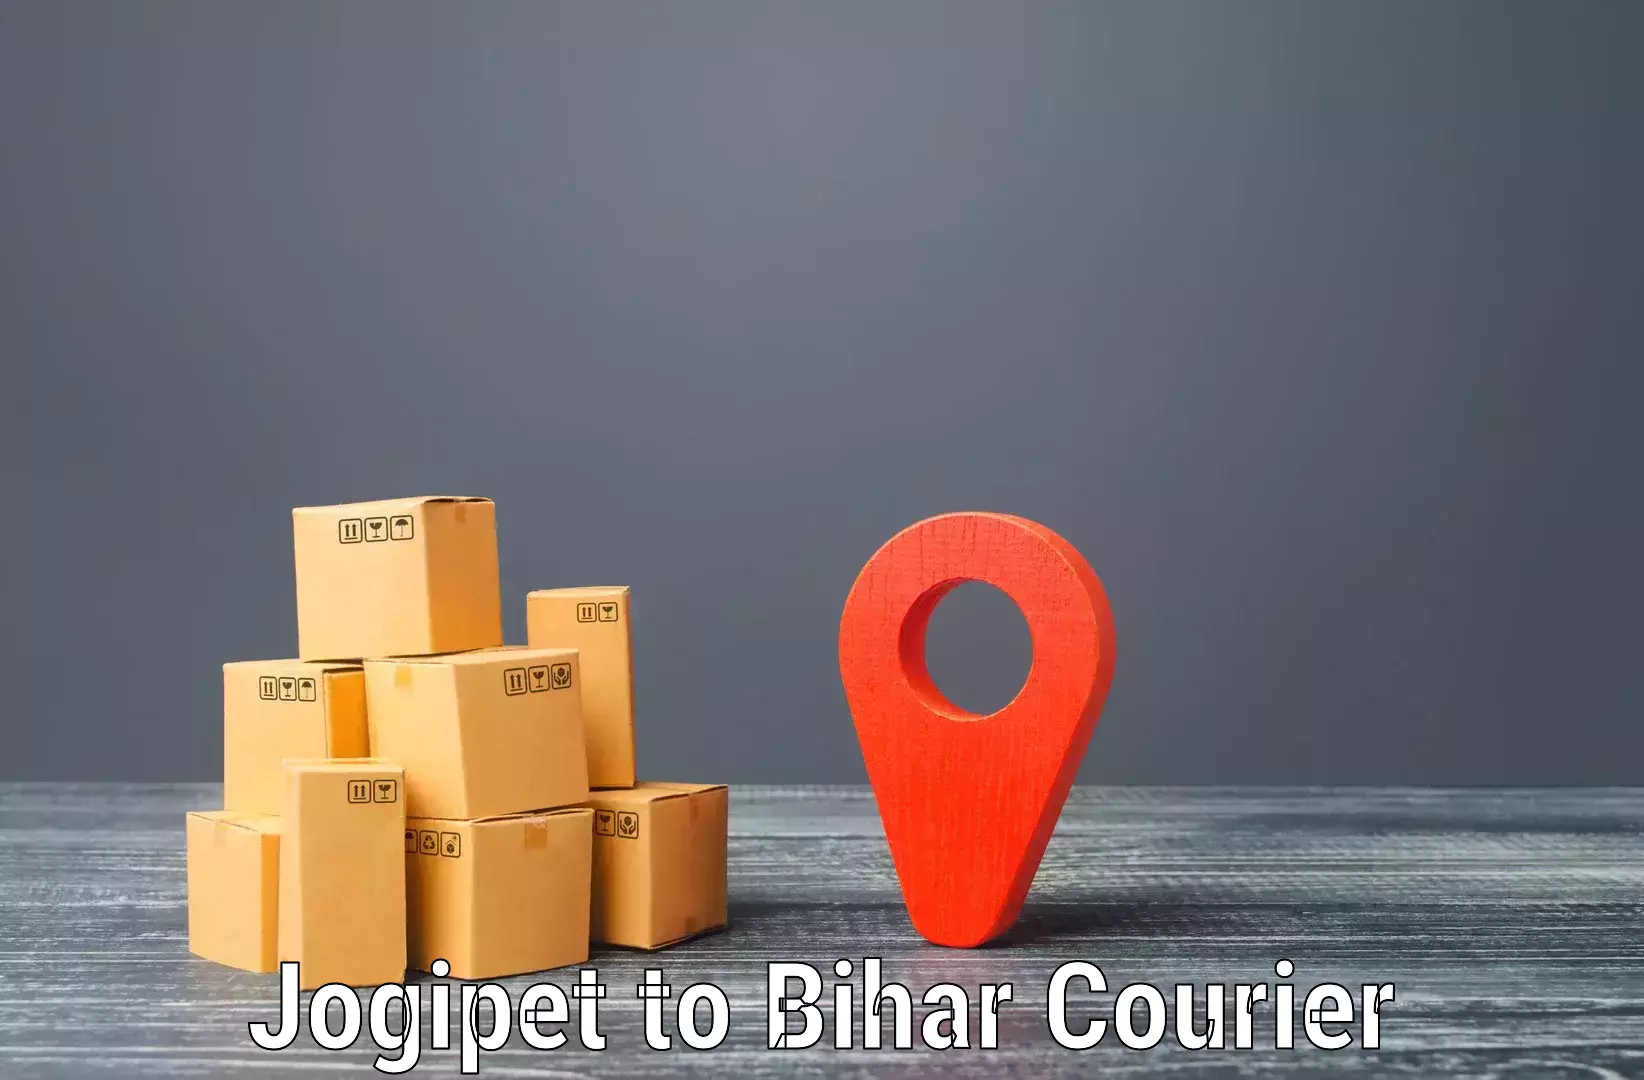 User-friendly courier app Jogipet to Dehri